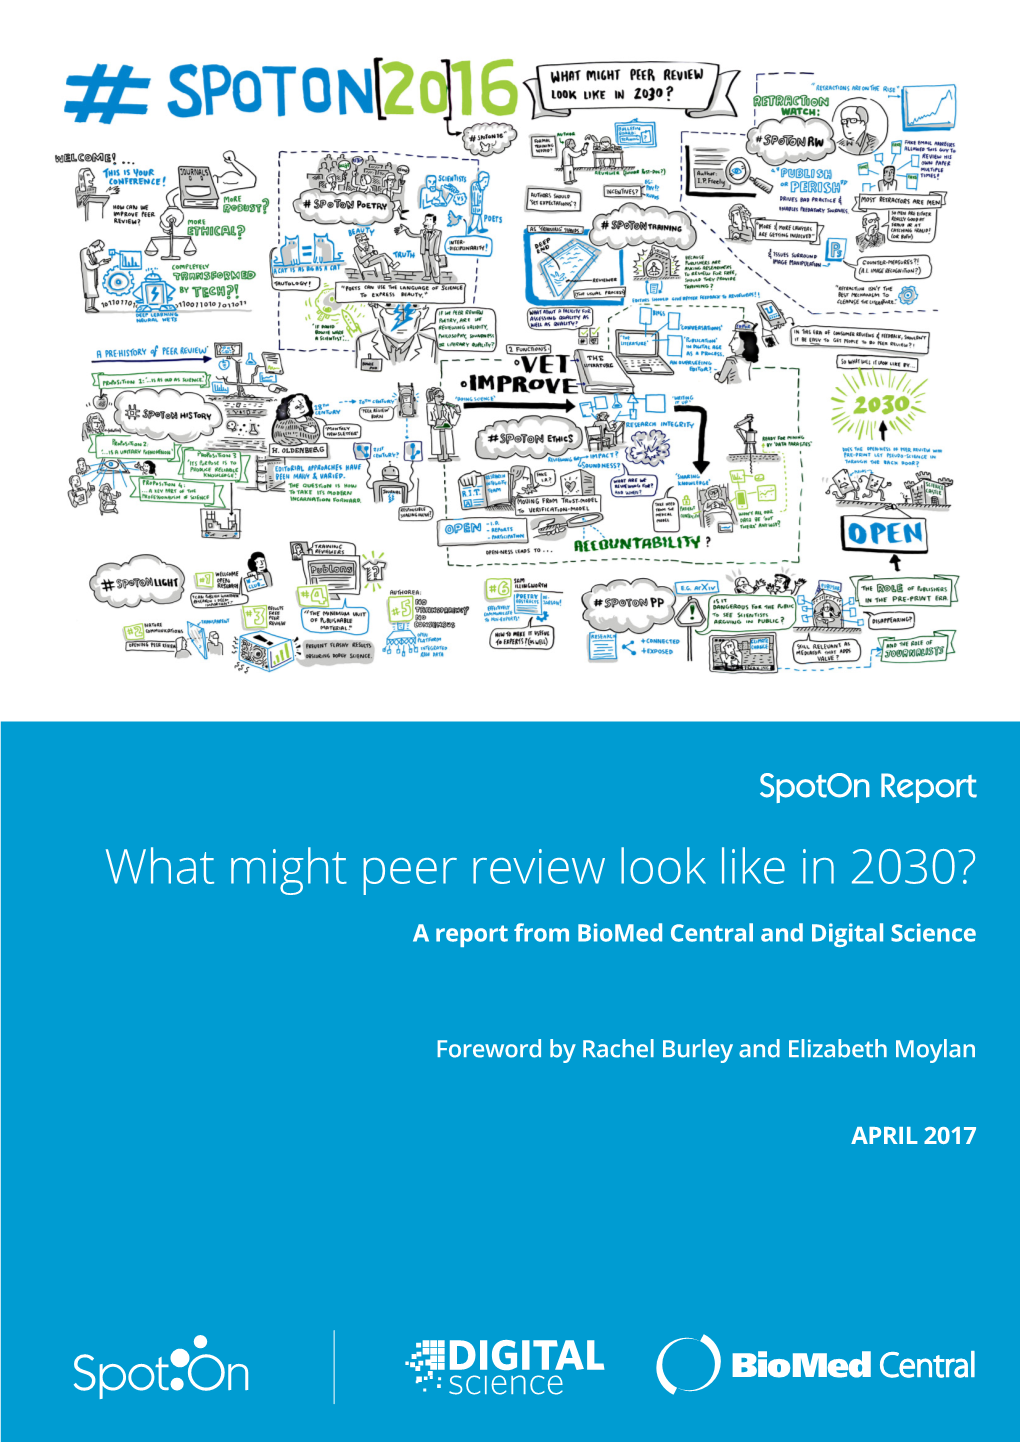 What Might Peer Review Look Like in 2030?